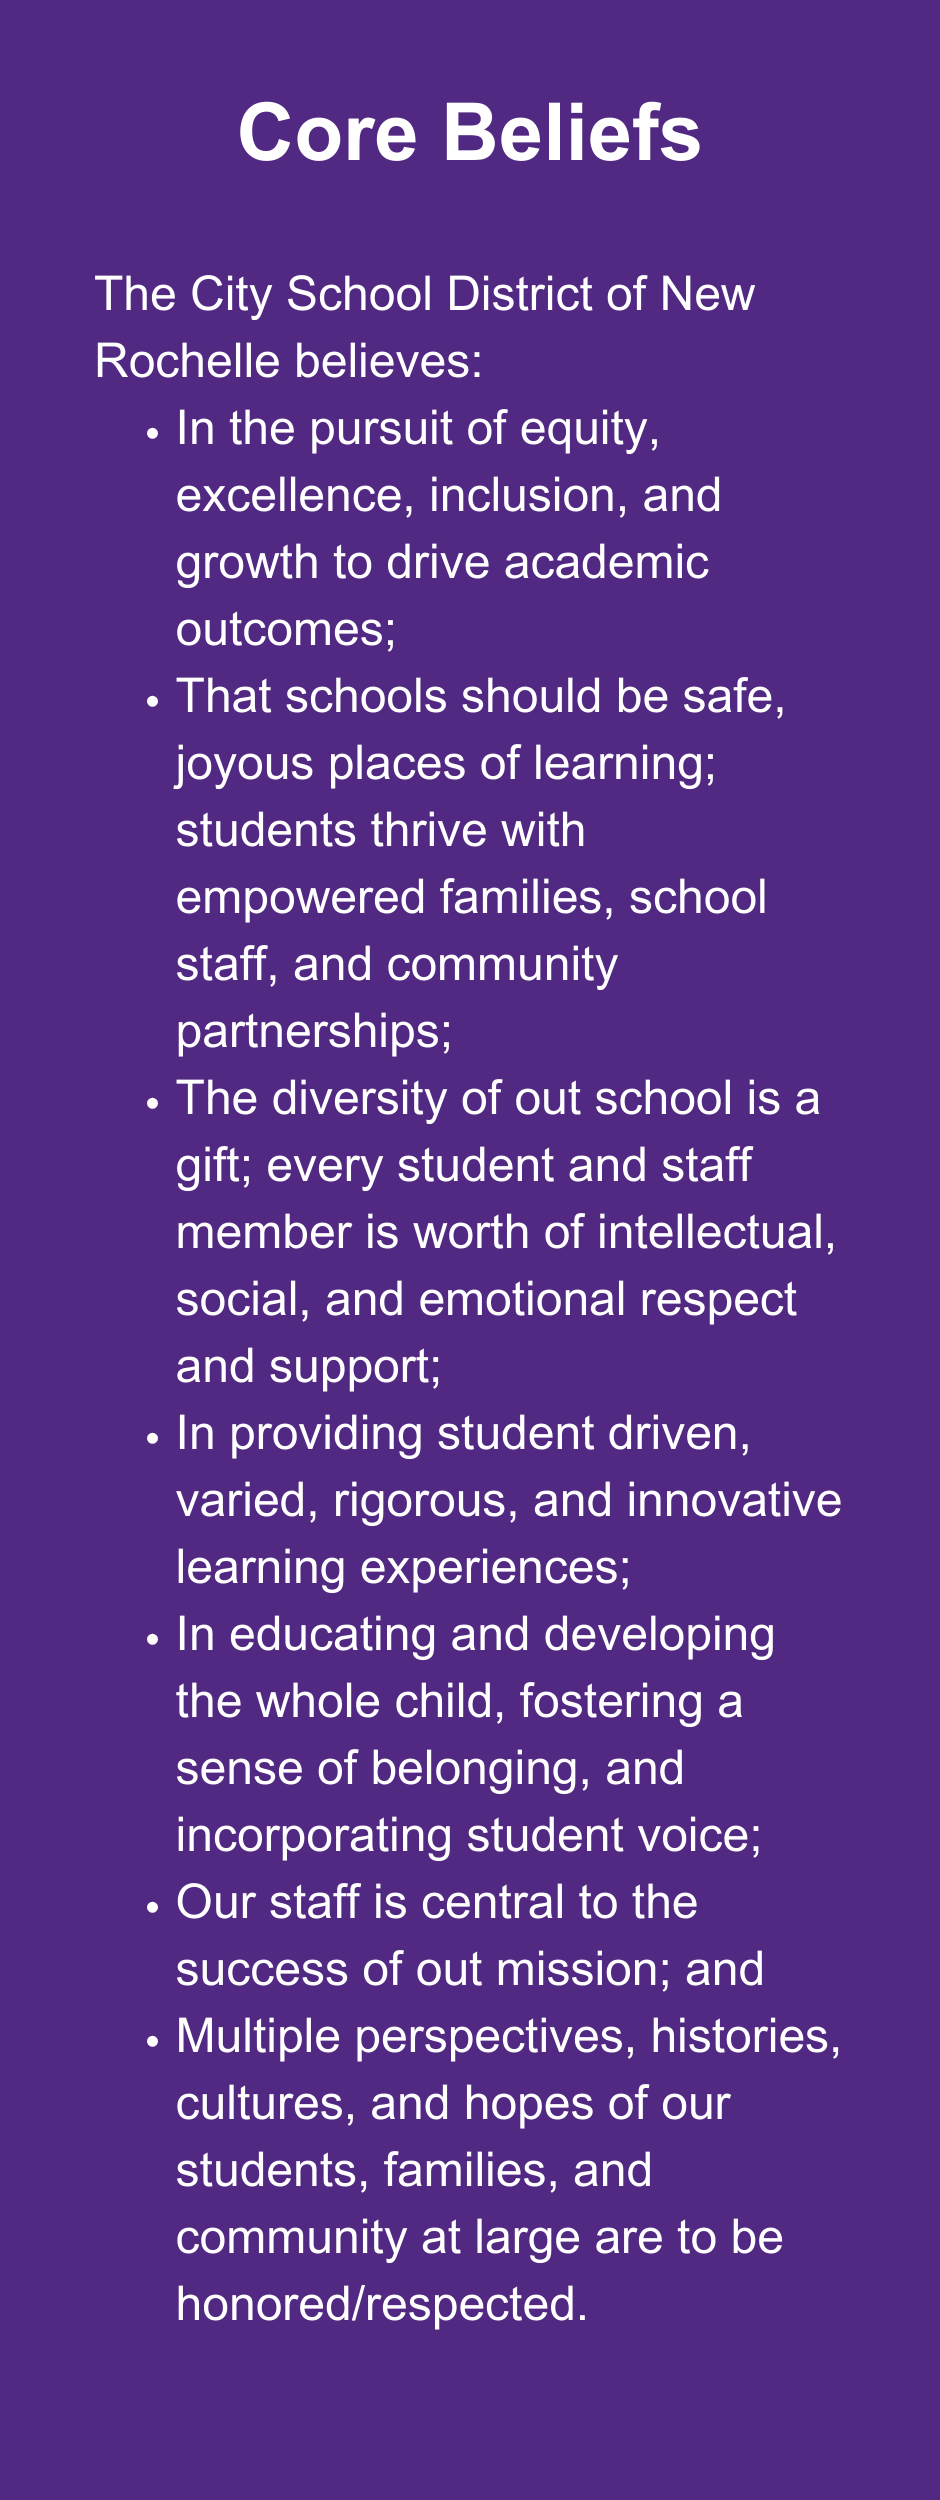 Core Beliefs: The City School District of New Rochelle believes: In the pursuit of equity, excellence, inclusion, and growth to drive academic outcomes; That schools should be safe, joyous places of learning; students thrive with empowered families, school staff, and community partnerships; The diversity of out school is a gift; every student and staff member is worth of intellectual, social, and emotional respect and support; In providing student driven, varied, rigorous, and innovative learning experiences; In educating and developing the whole child, fostering a sense of belonging, and incorporating student voice; Our staff is central to the success of out mission; and Multiple perspectives, histories, cultures, and hopes of our students, families, and community at large are to be honored/respected.